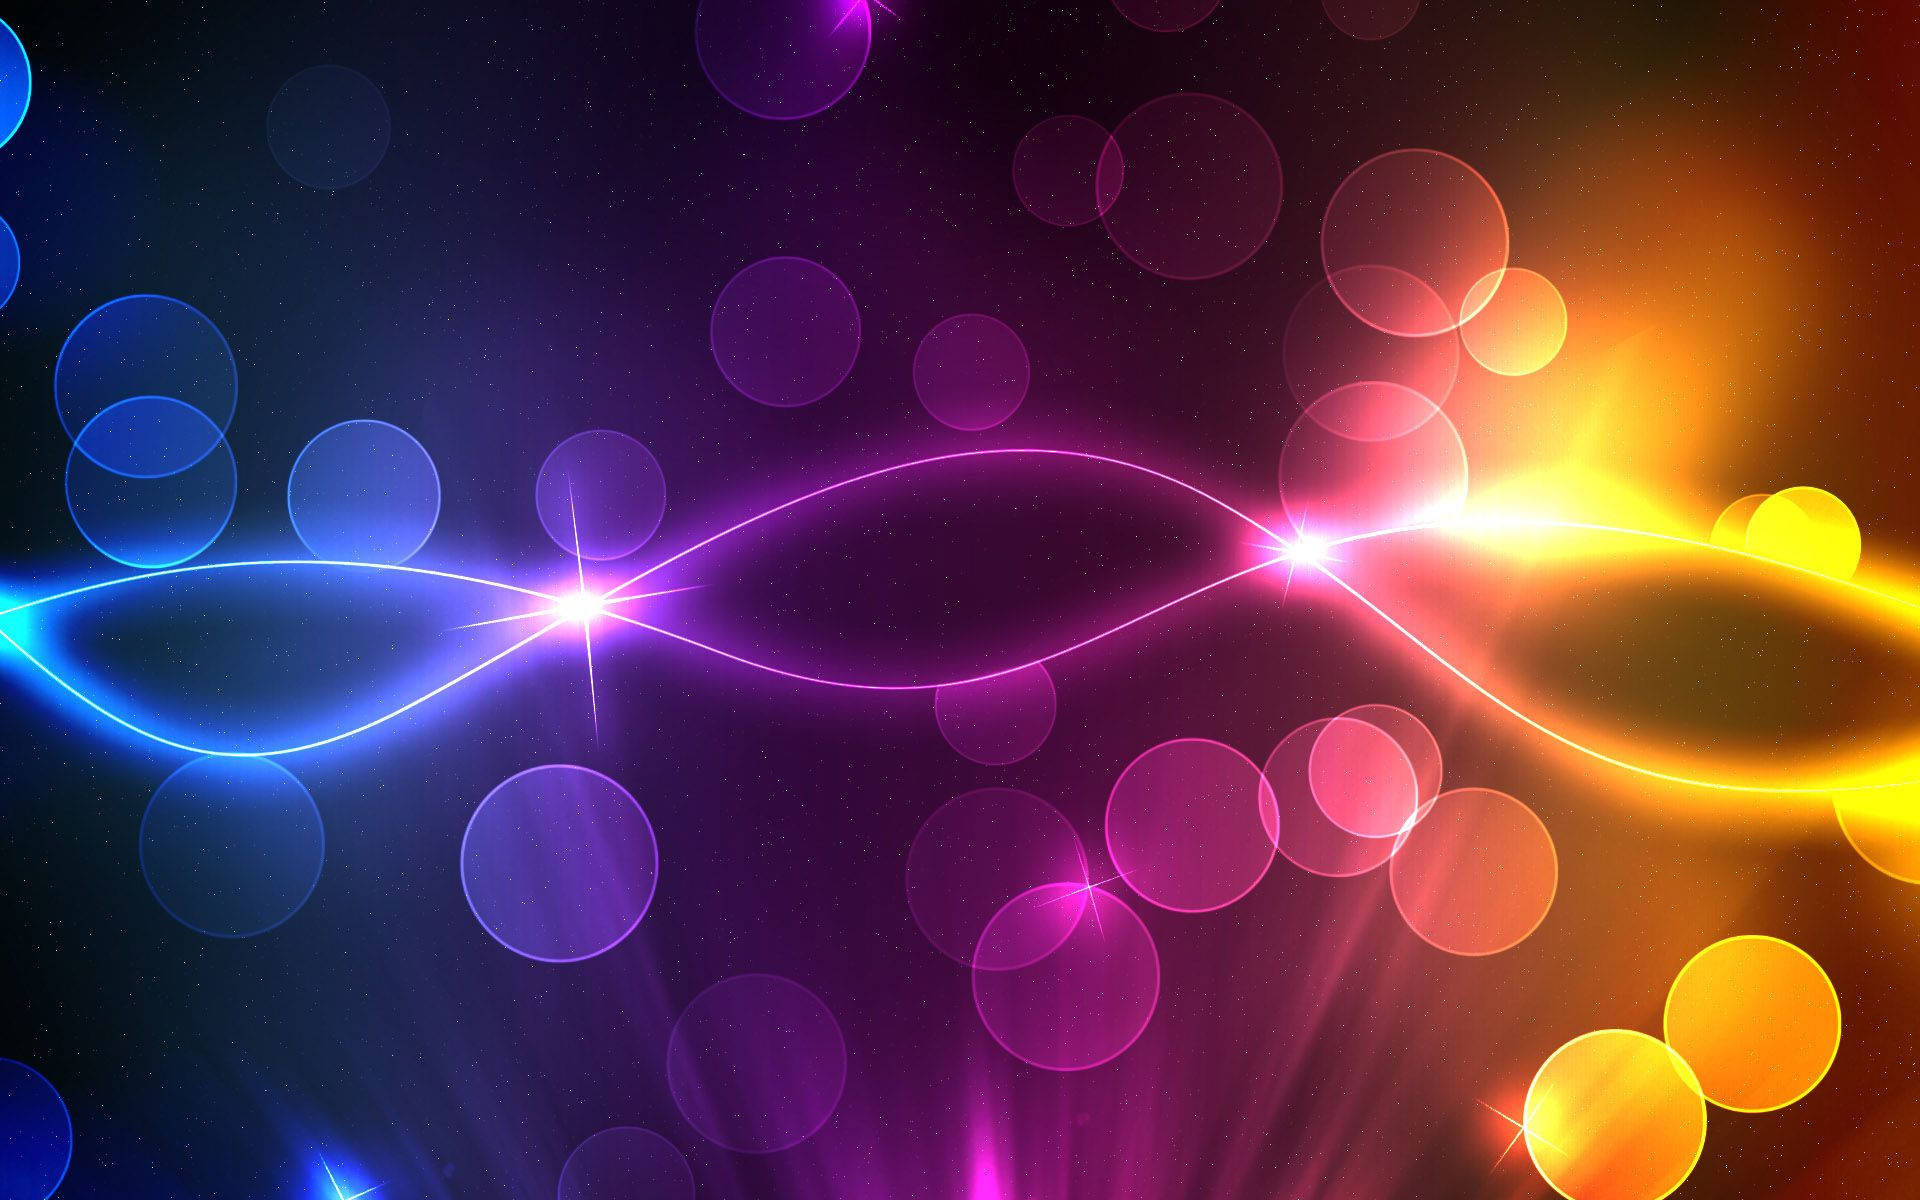 Bubble background with blue, violet and yellow lights, flowing lines and spots.